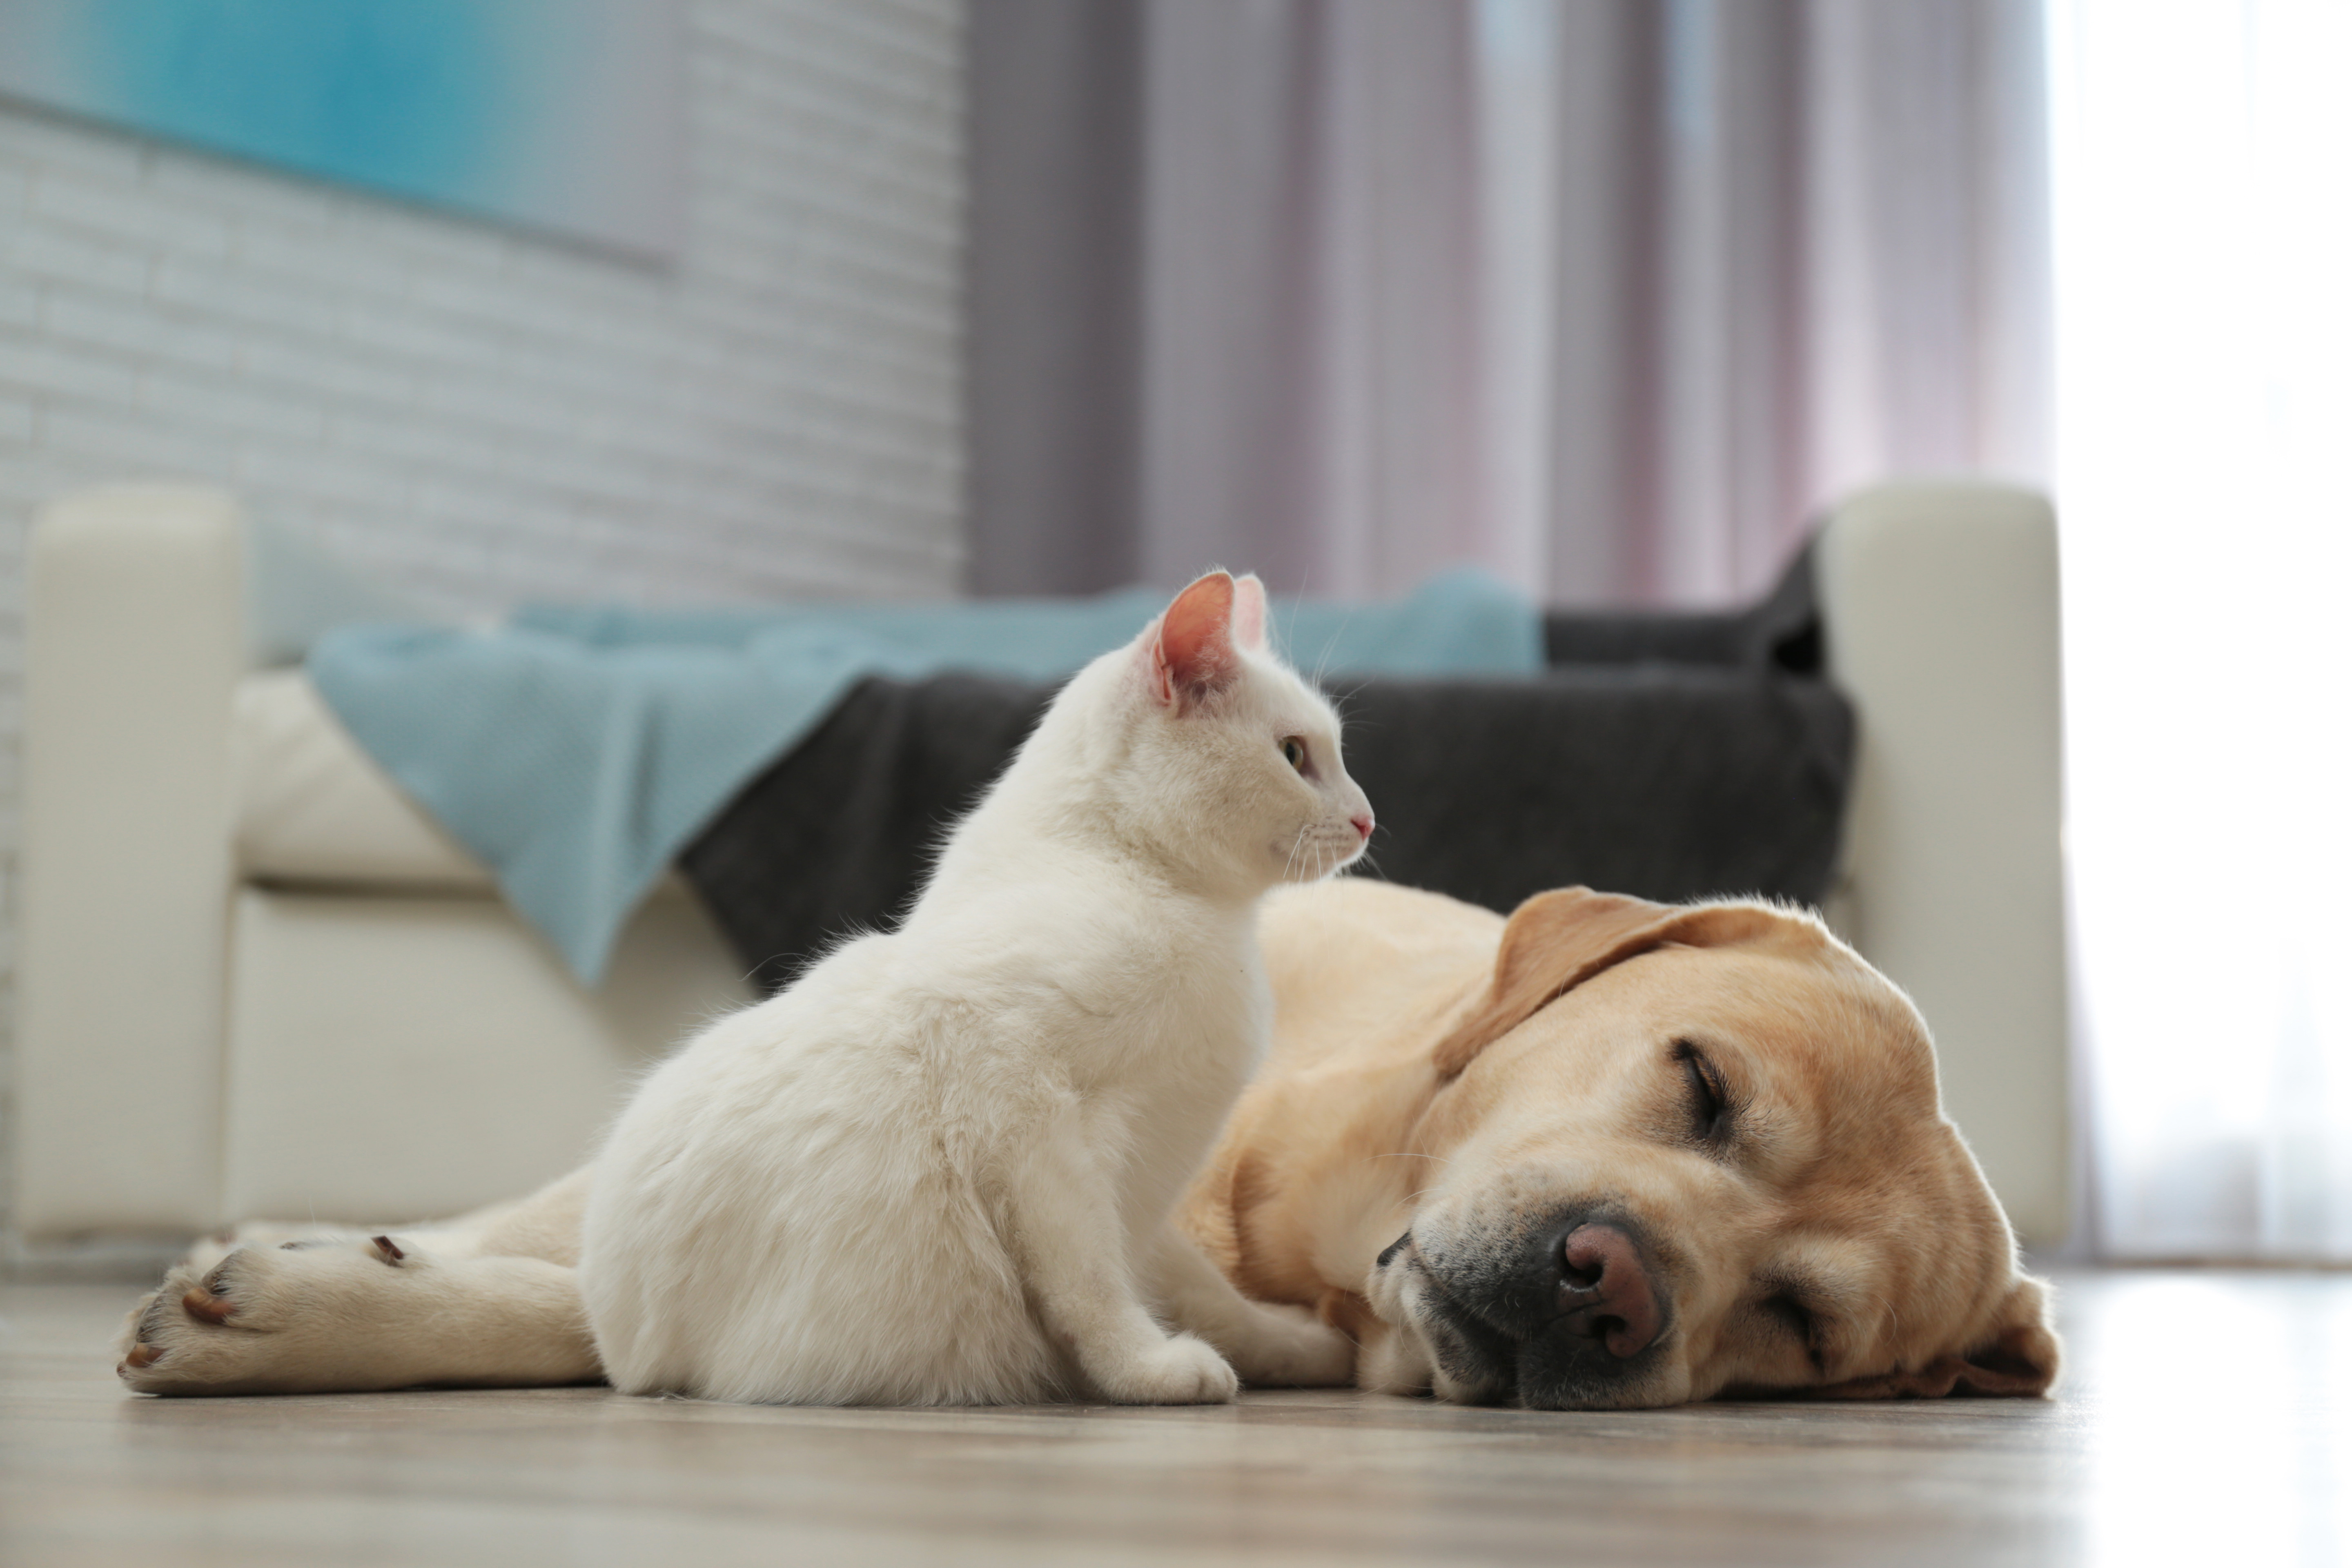 Adorable dog and cat together on floor indoors. friends forever